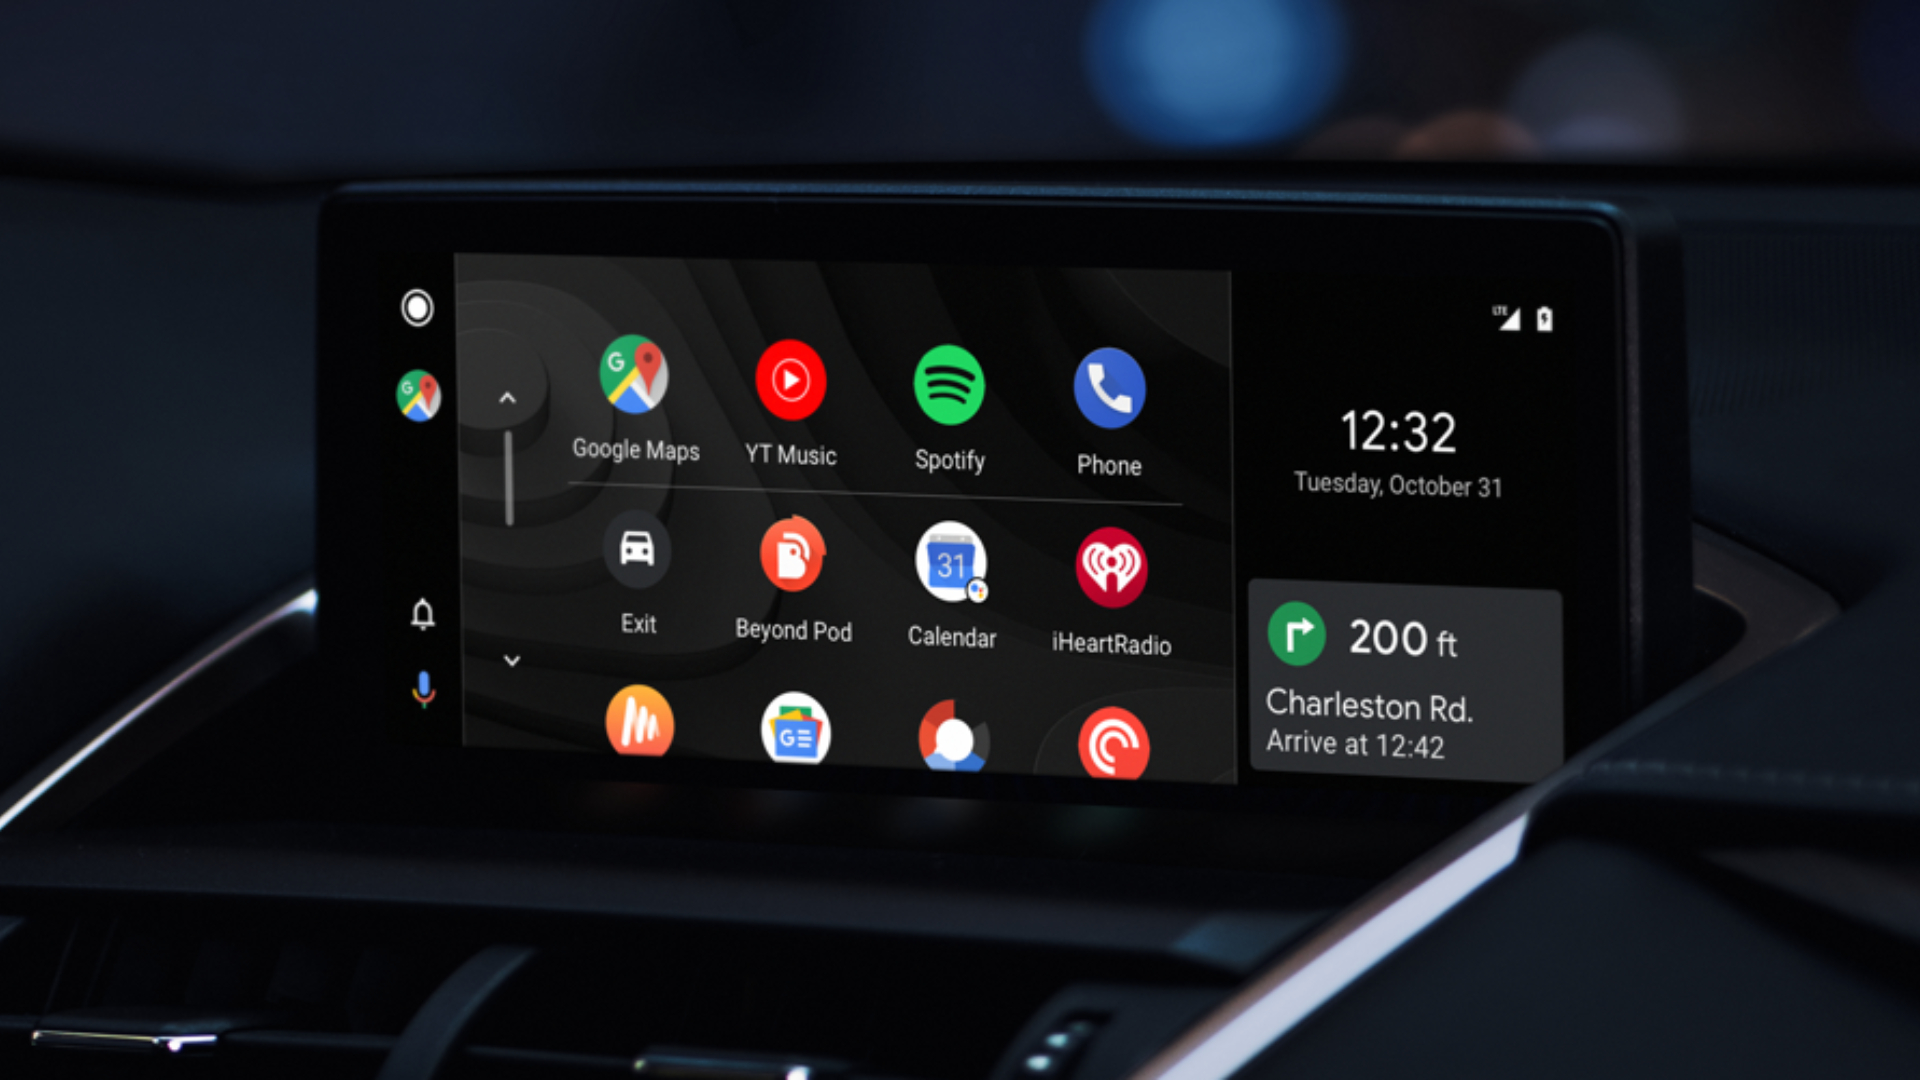 How to download Android Auto on Mobile